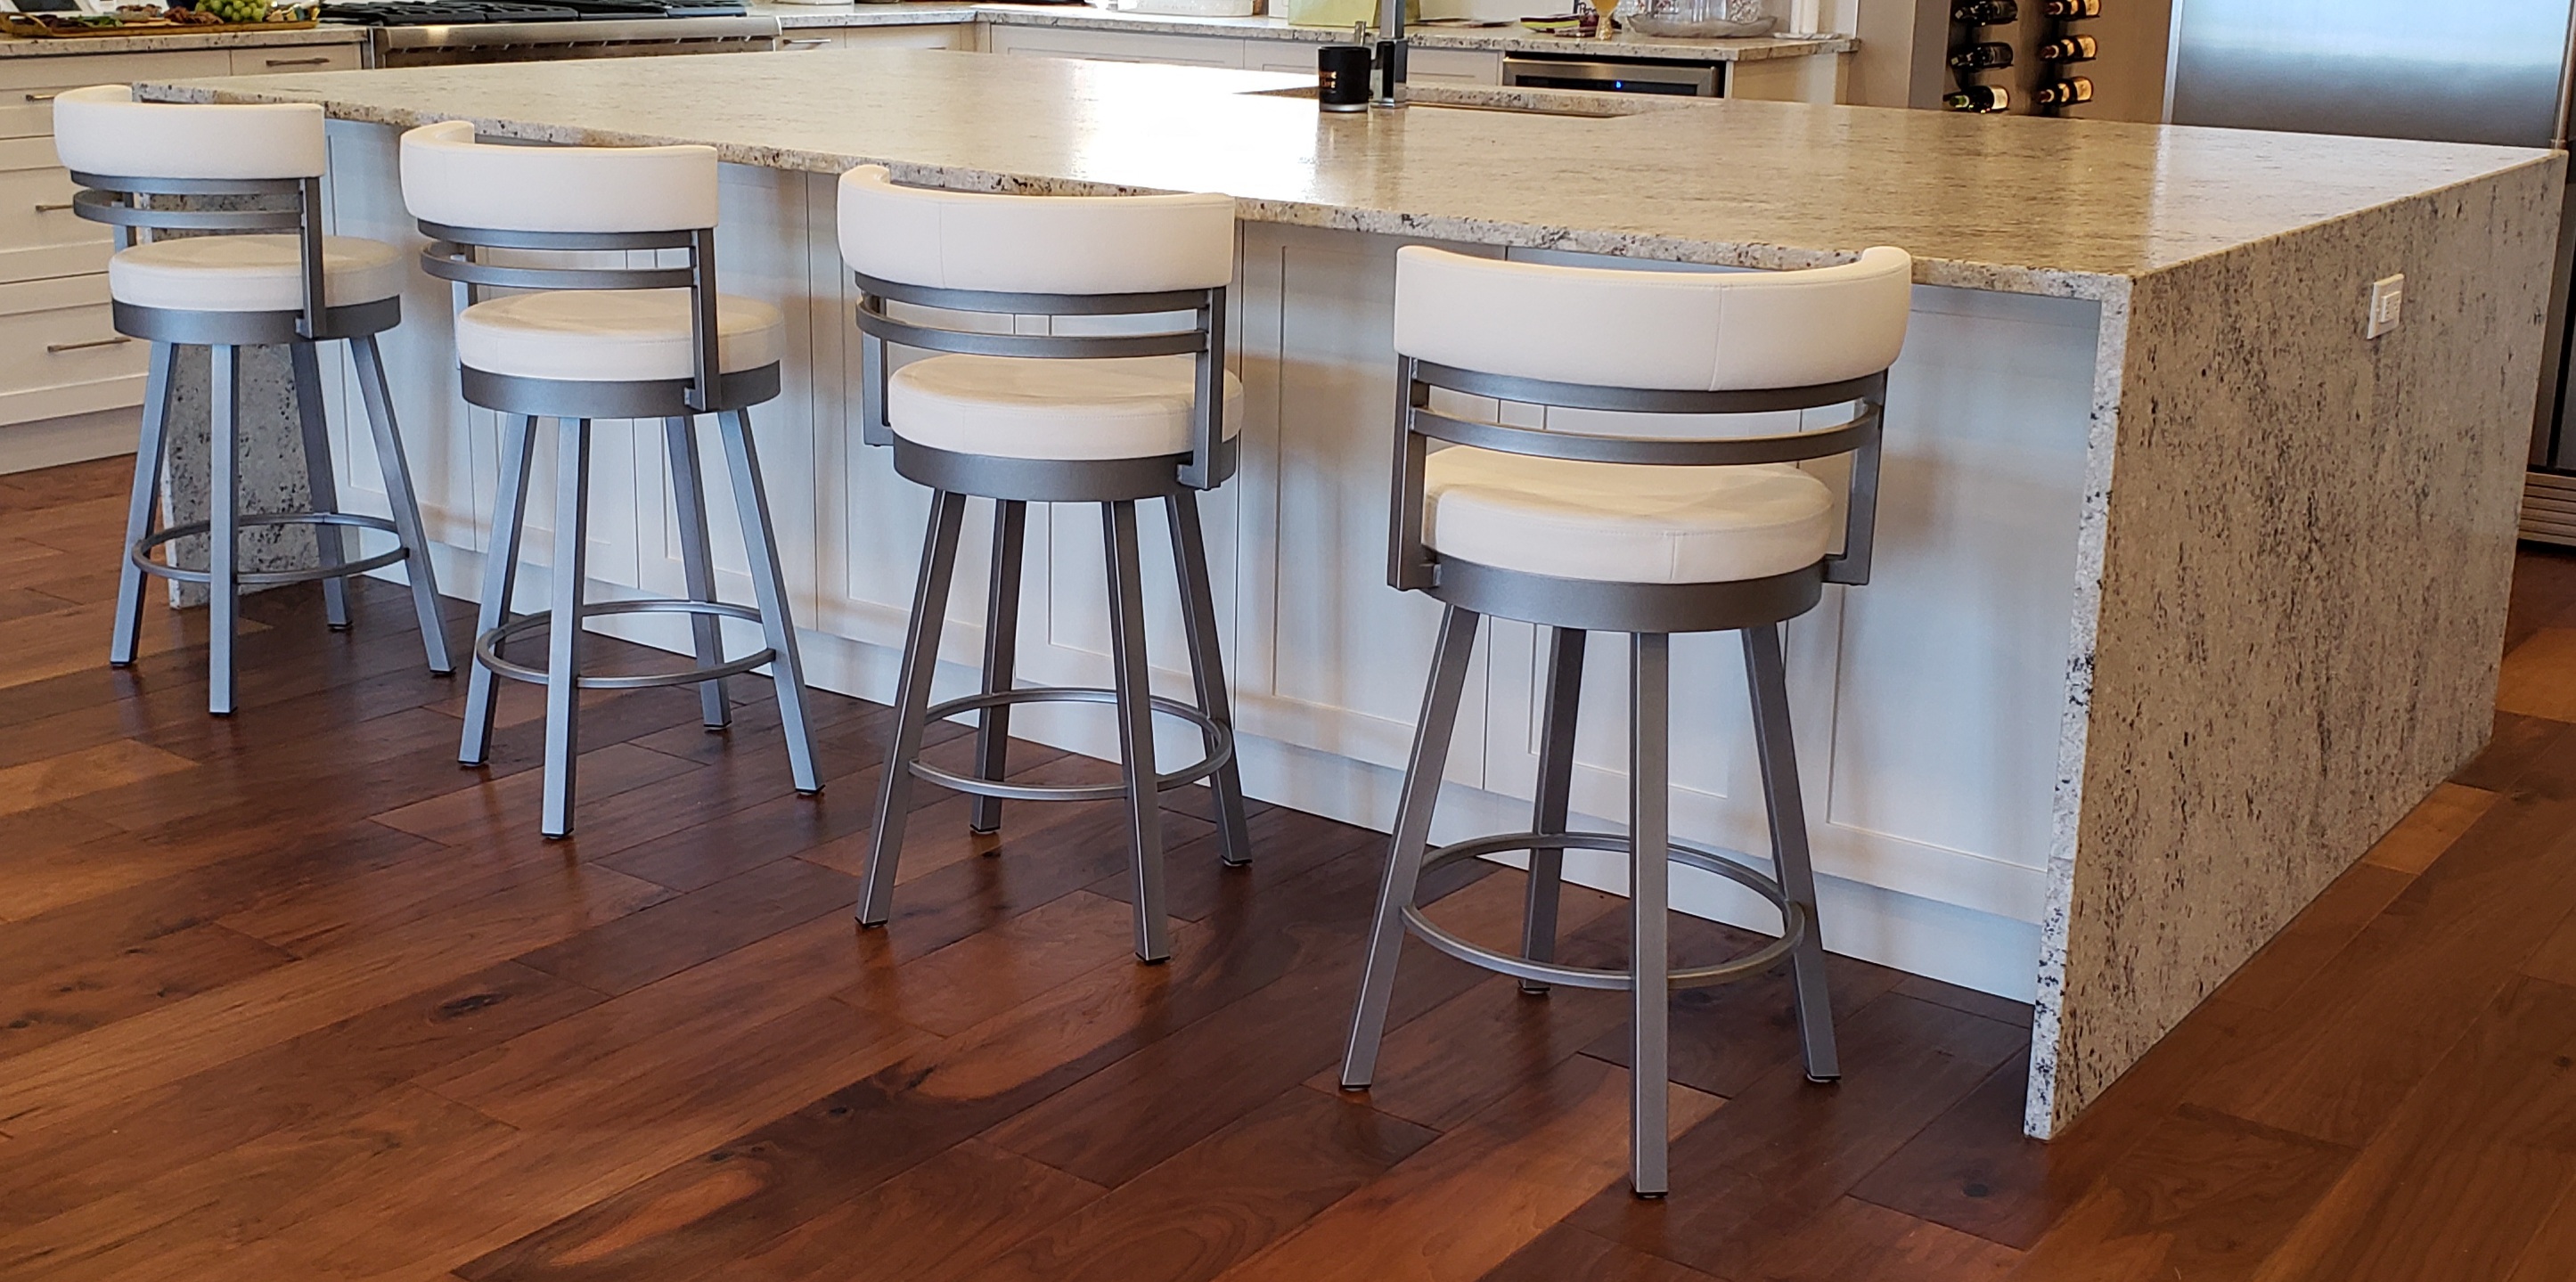 where to buy bar stools for kitchen